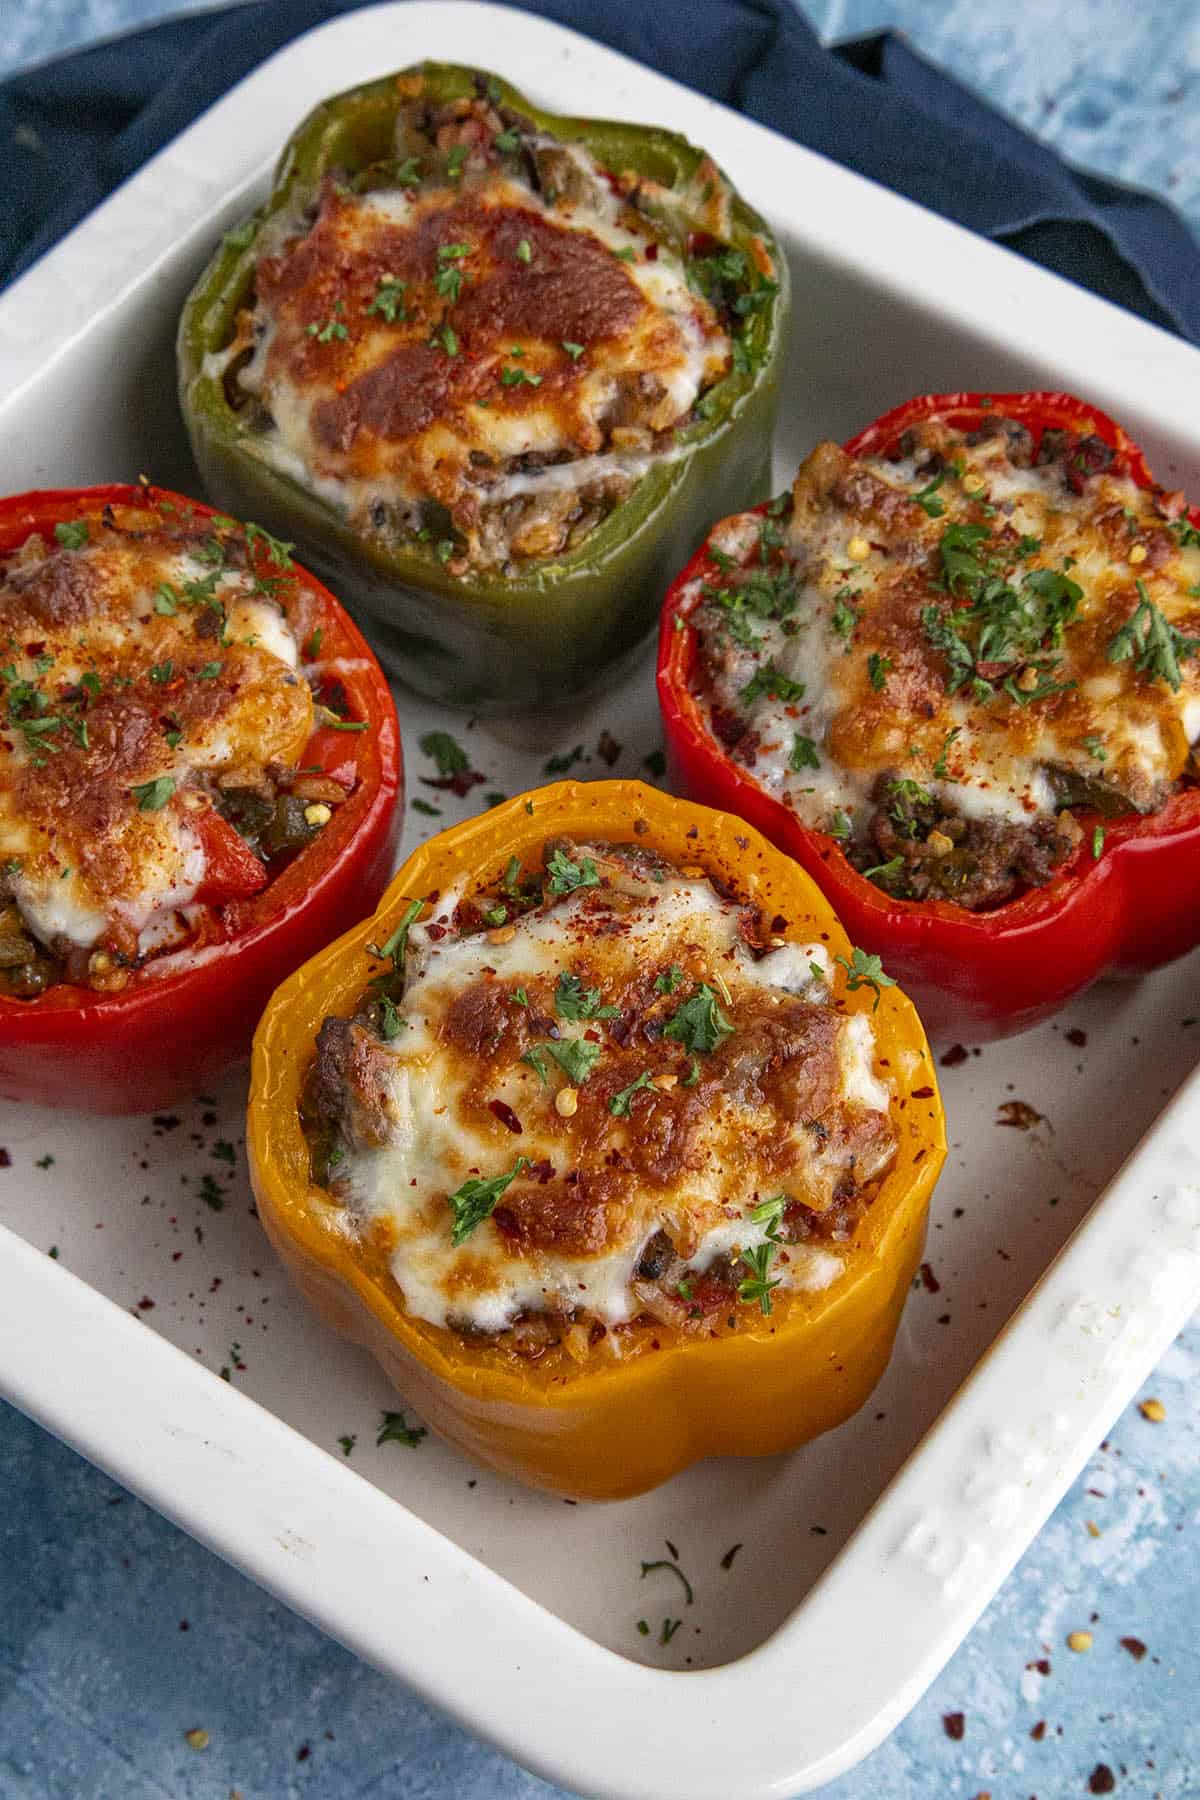 4 stuffed bell peppers out of the oven with melty cheese on top, ready to serve